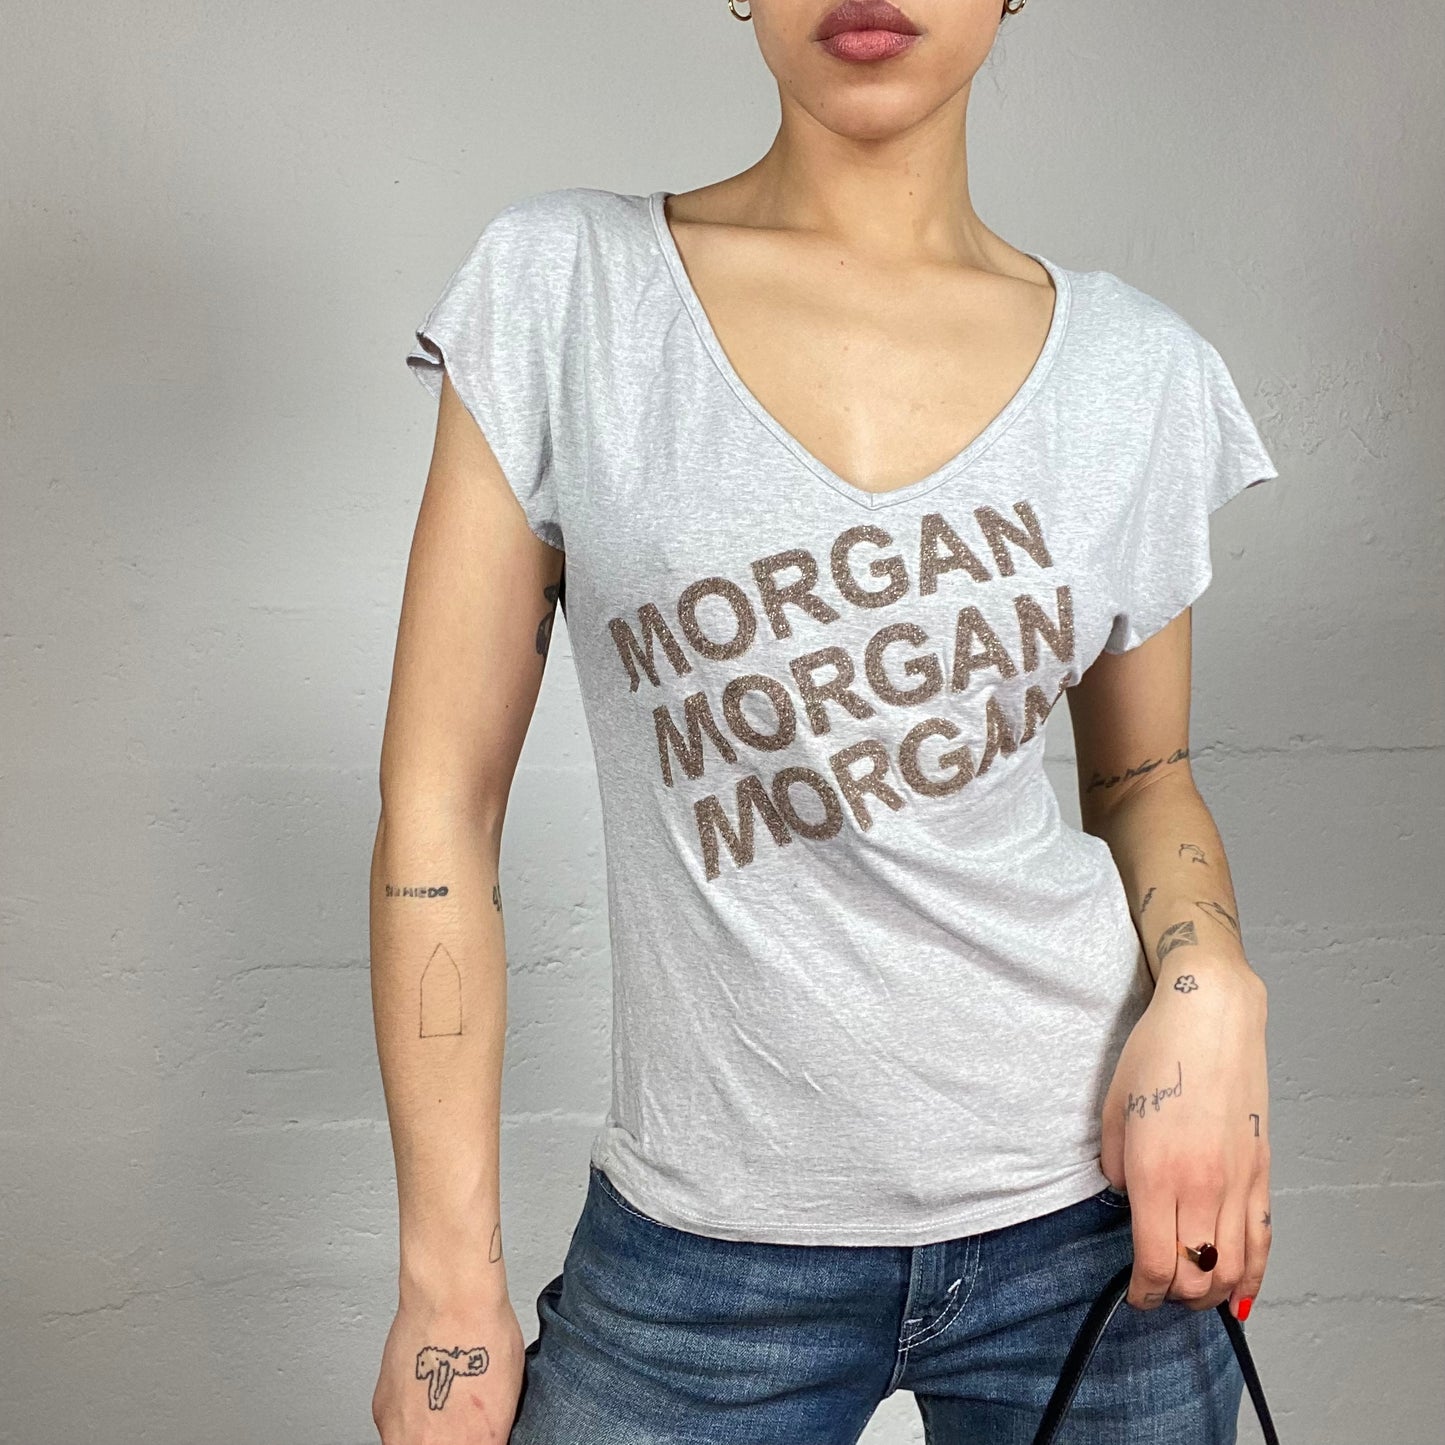 Vintage 2000's Morgan Downtown Girl Grey Top with Golden Glitter Brand Print (S)